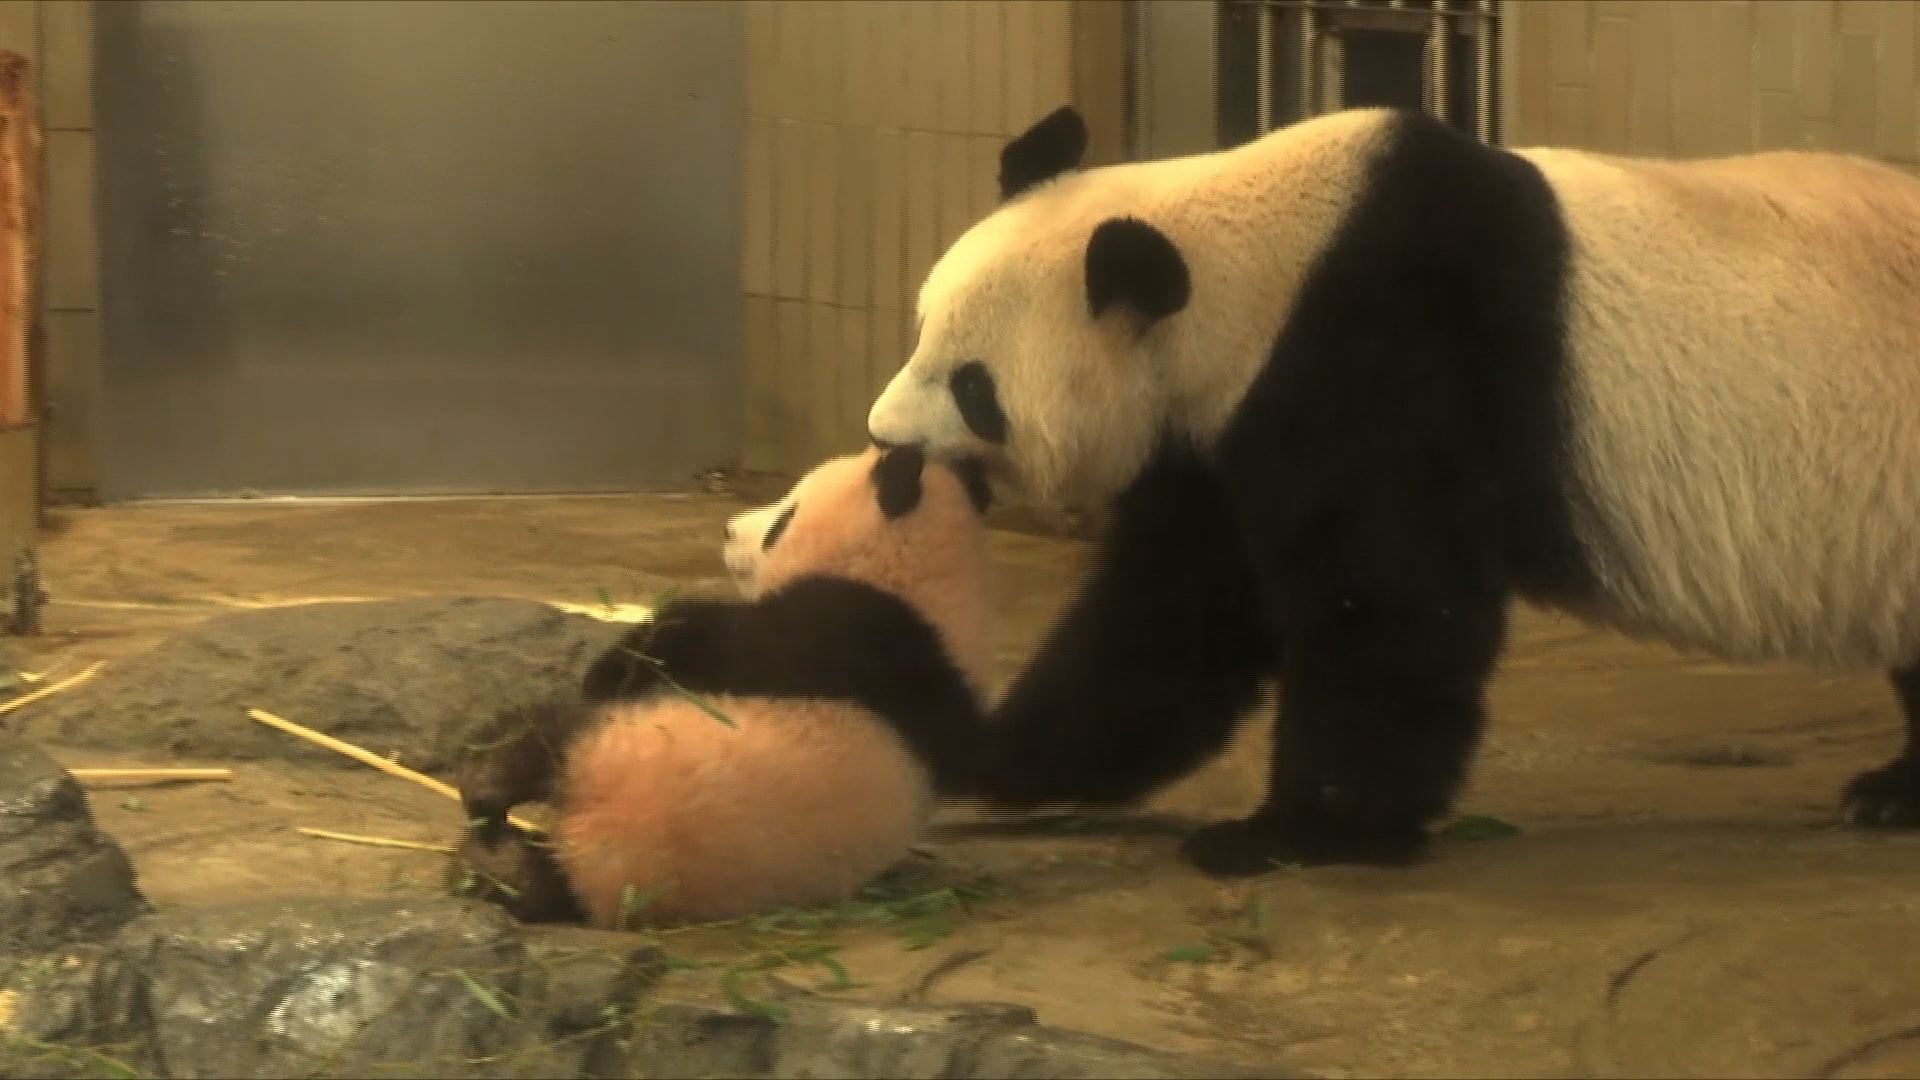 WATCH: Tokyo crowds flock to see baby panda on first day